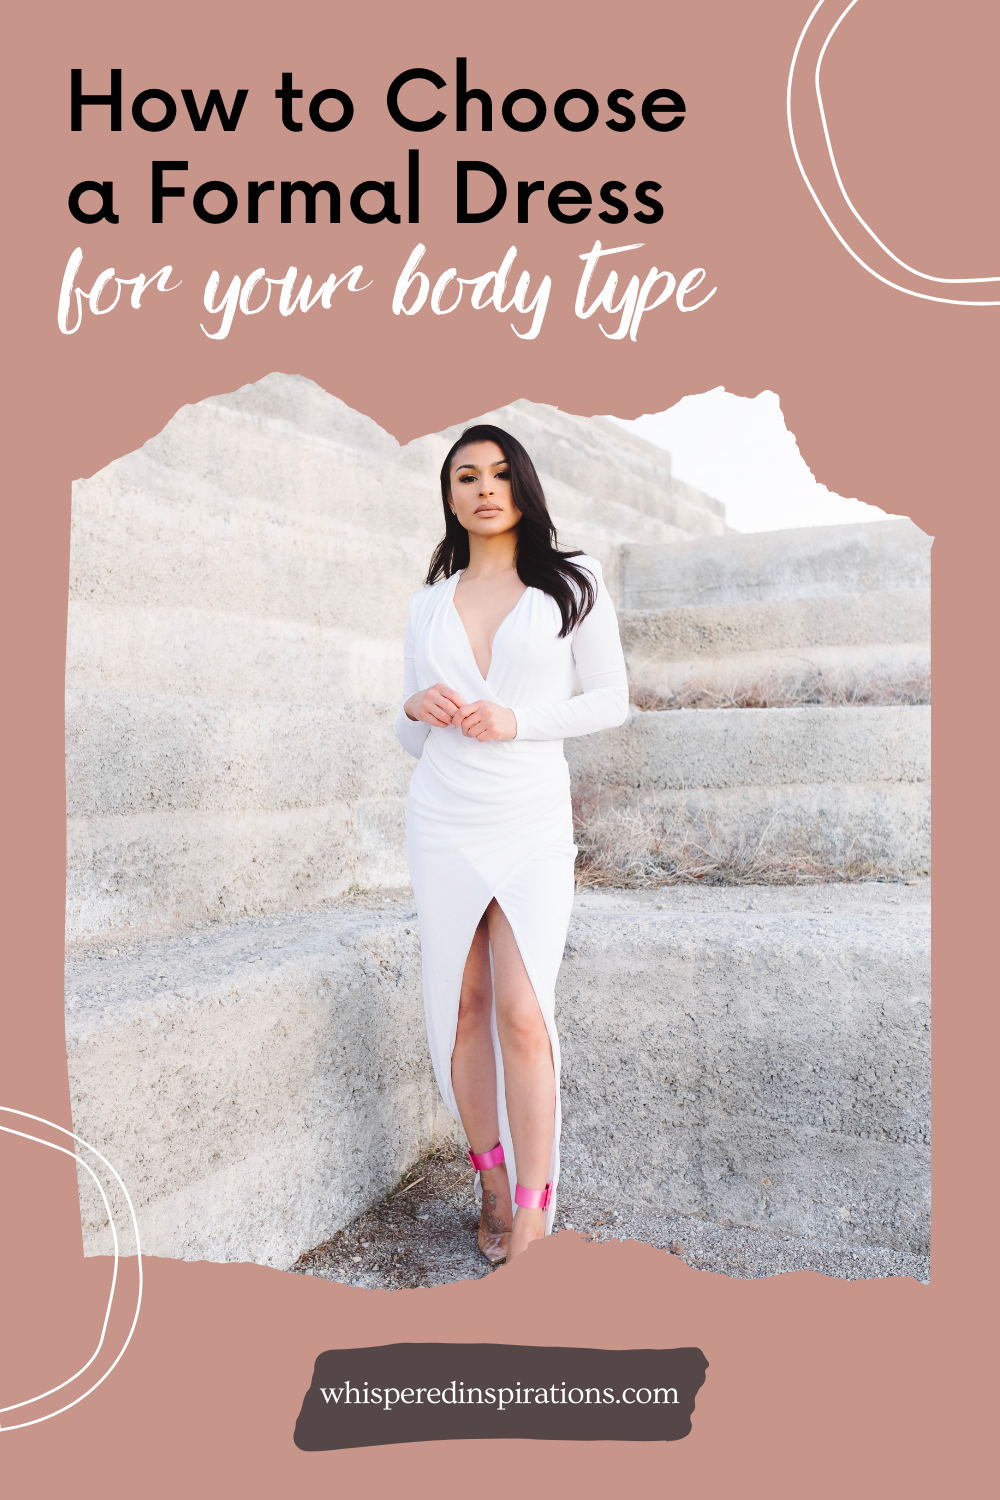 Woman stands in front of a concrete wall wearing a white formal dress. This article explains how to choose a formal dress for your body type.